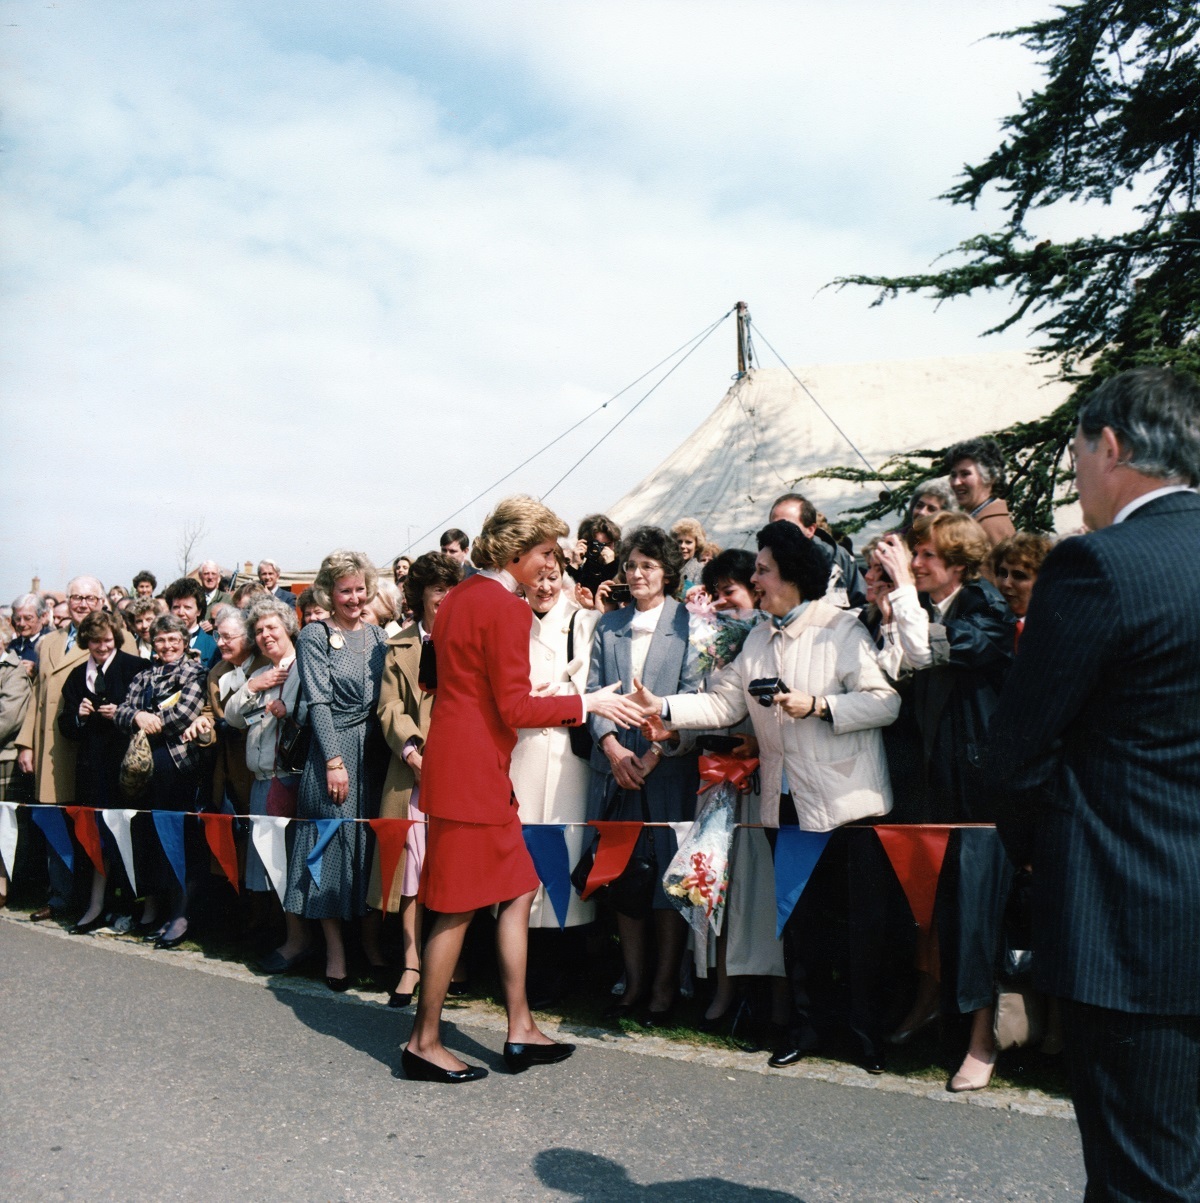 Centre of attention - Princess Diana dazzles the adoring crowd of volunteers, hospice staff and patients’ families